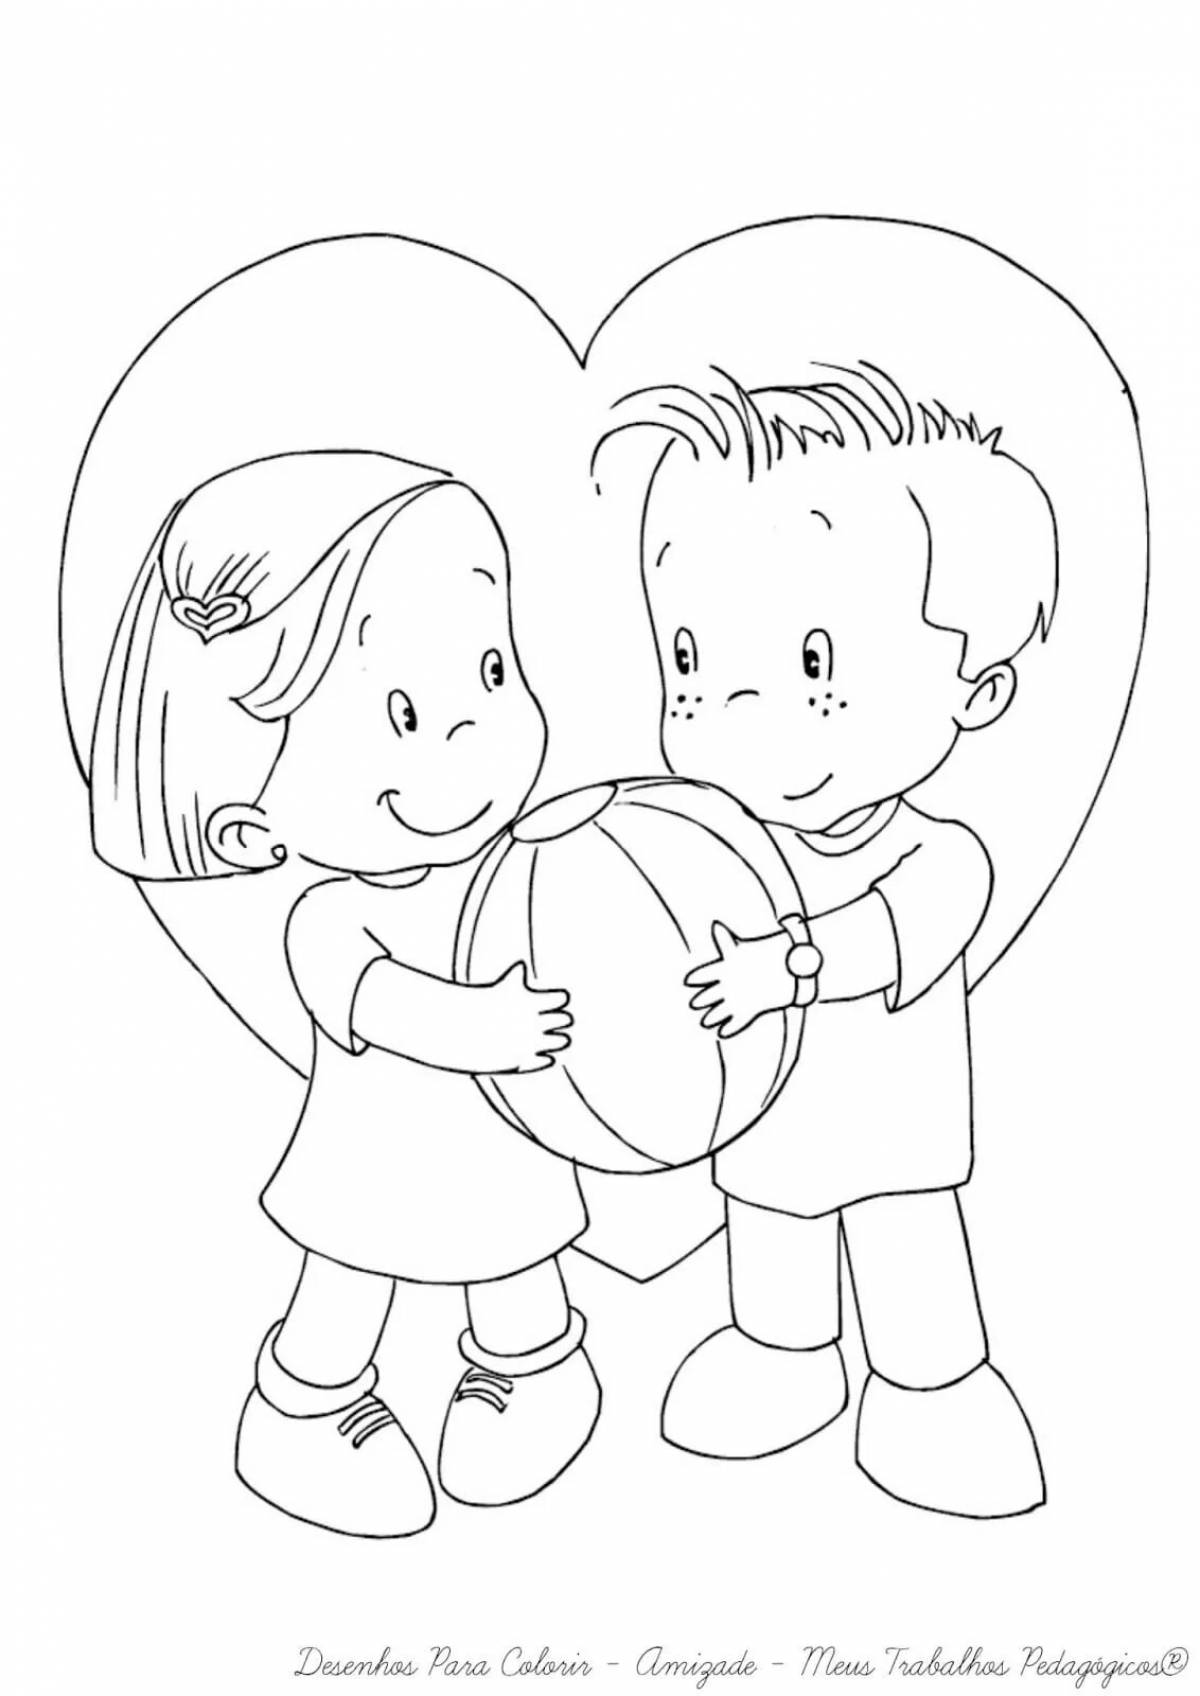 Coloring book friendship for preschoolers